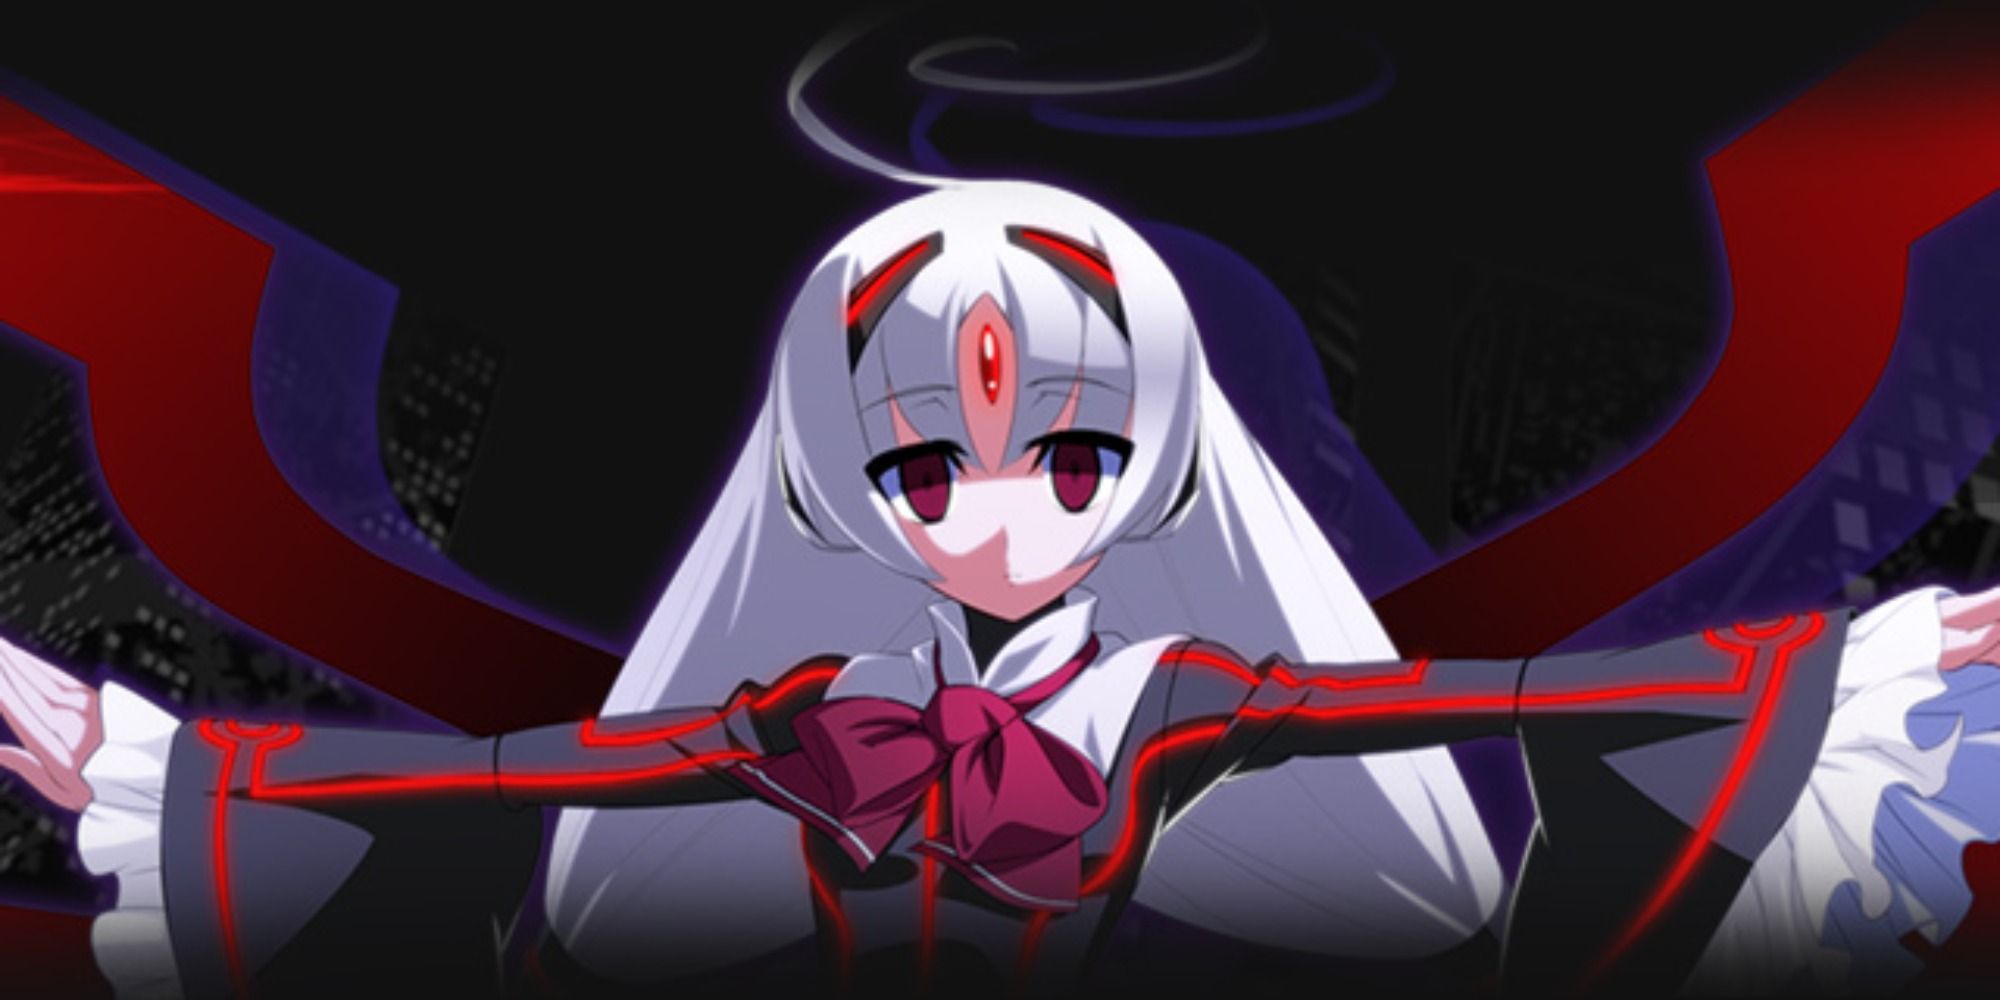 Vatista from Under Night In-Birth - A white haired woman with a red jewel in the middle of her forehead.